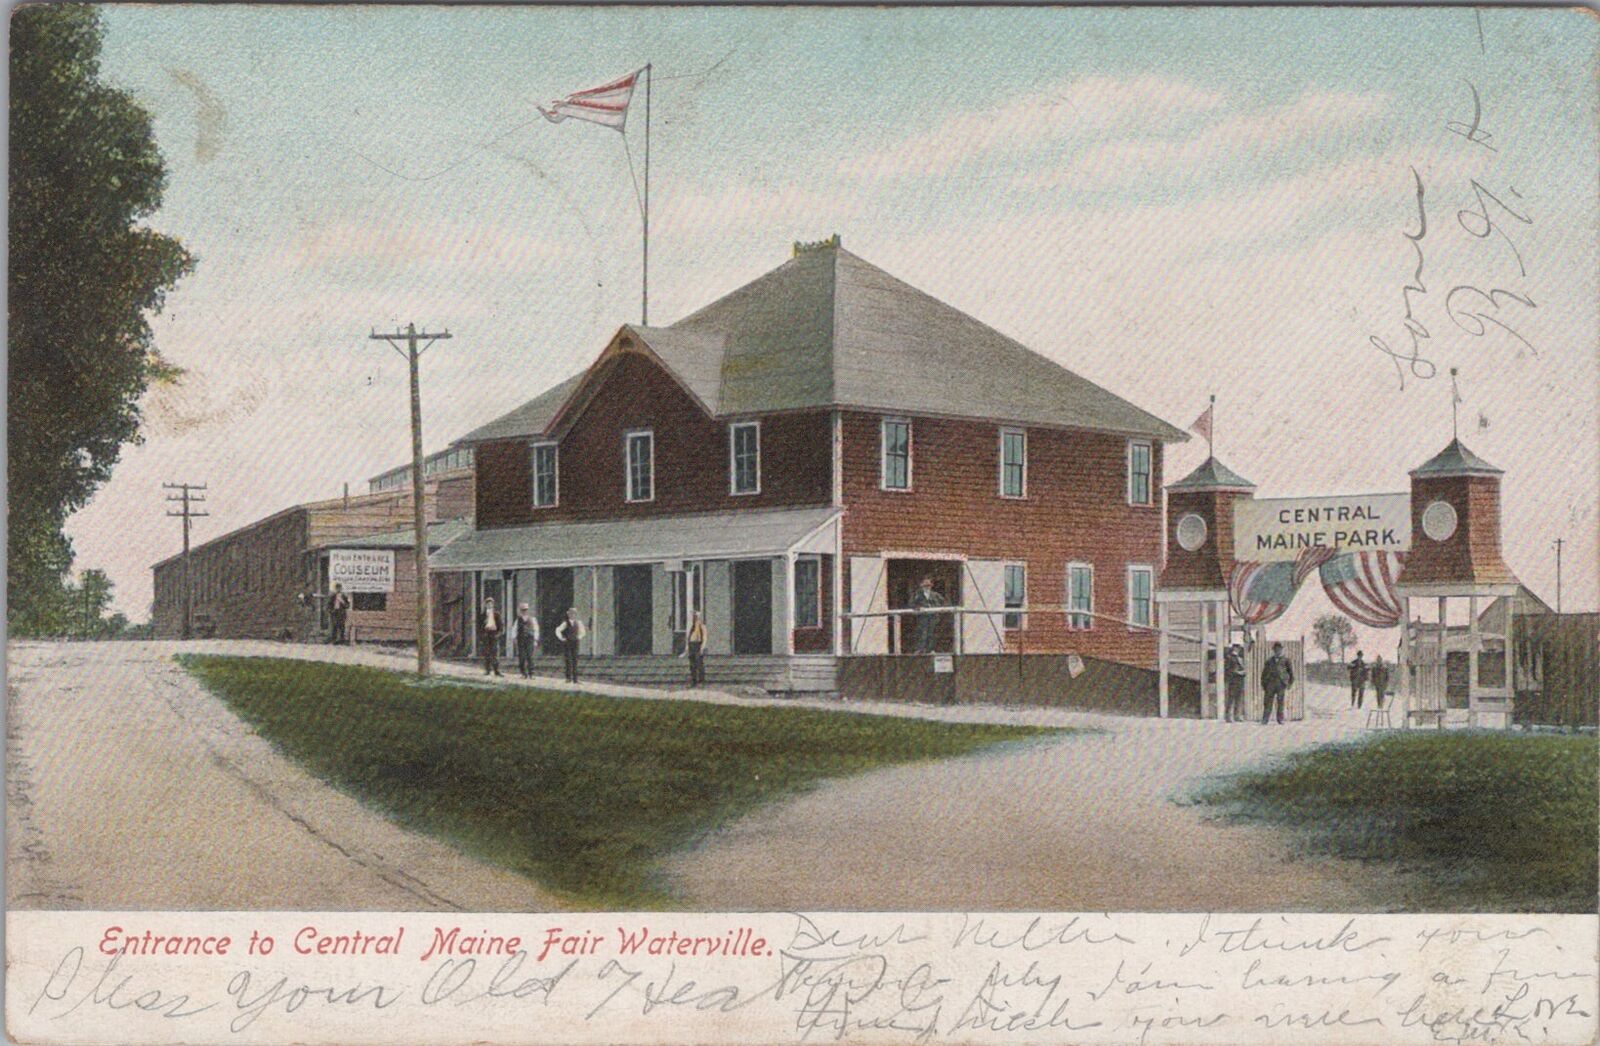 Entrance to Central Maine Fair Waterville 1906 Postcard